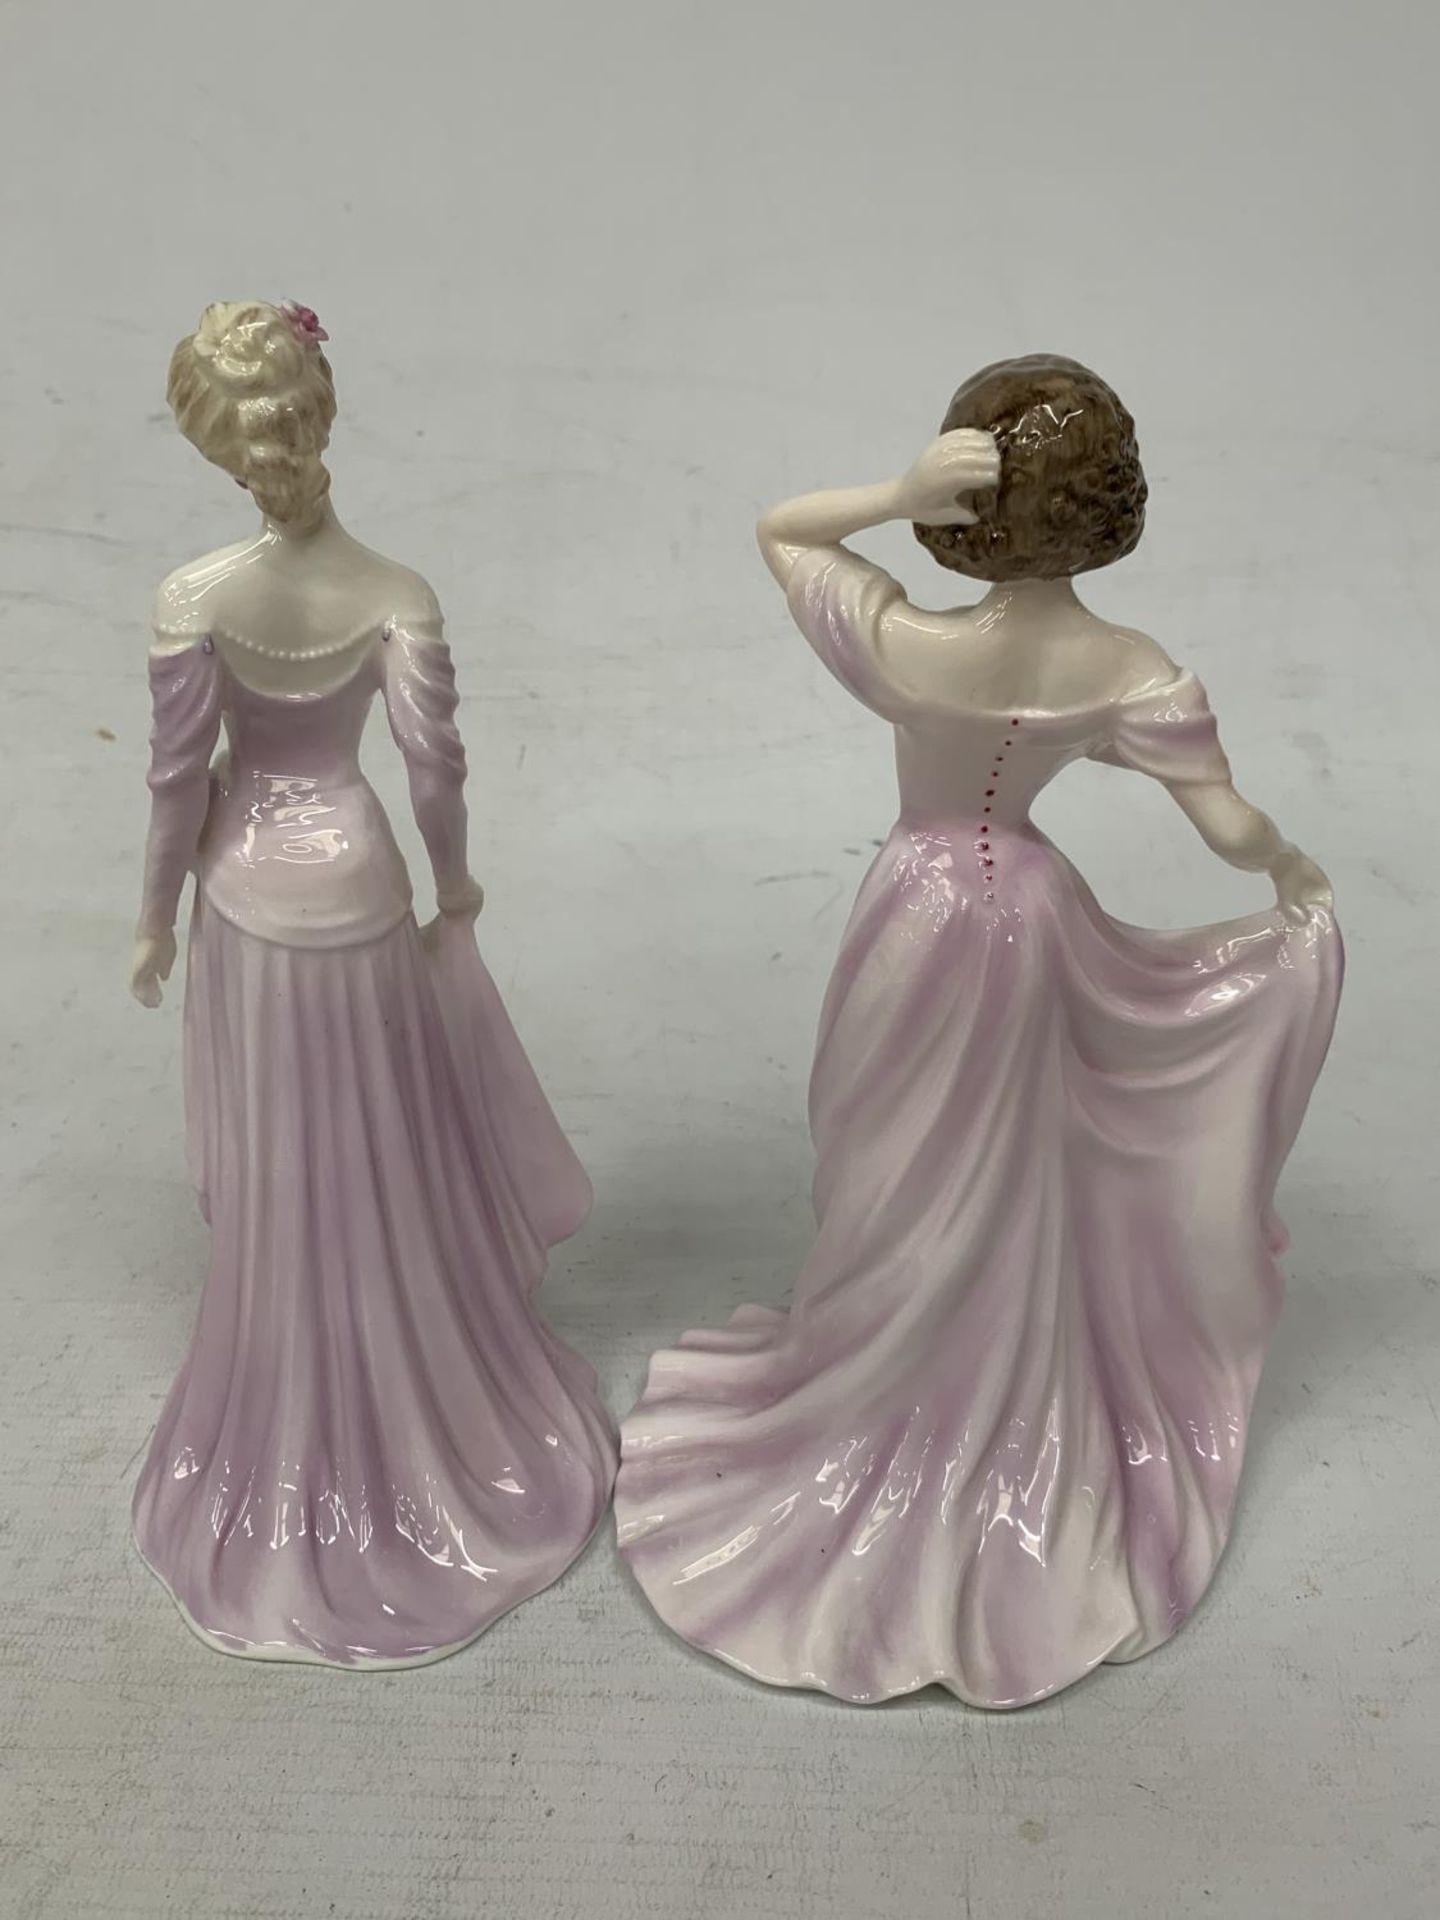 TWO COALPORT FIGURINES "STEPHANIE" (1992) AND VERONICA FROM THE LADIES OF FASHION COLLECTION ( - Image 3 of 4